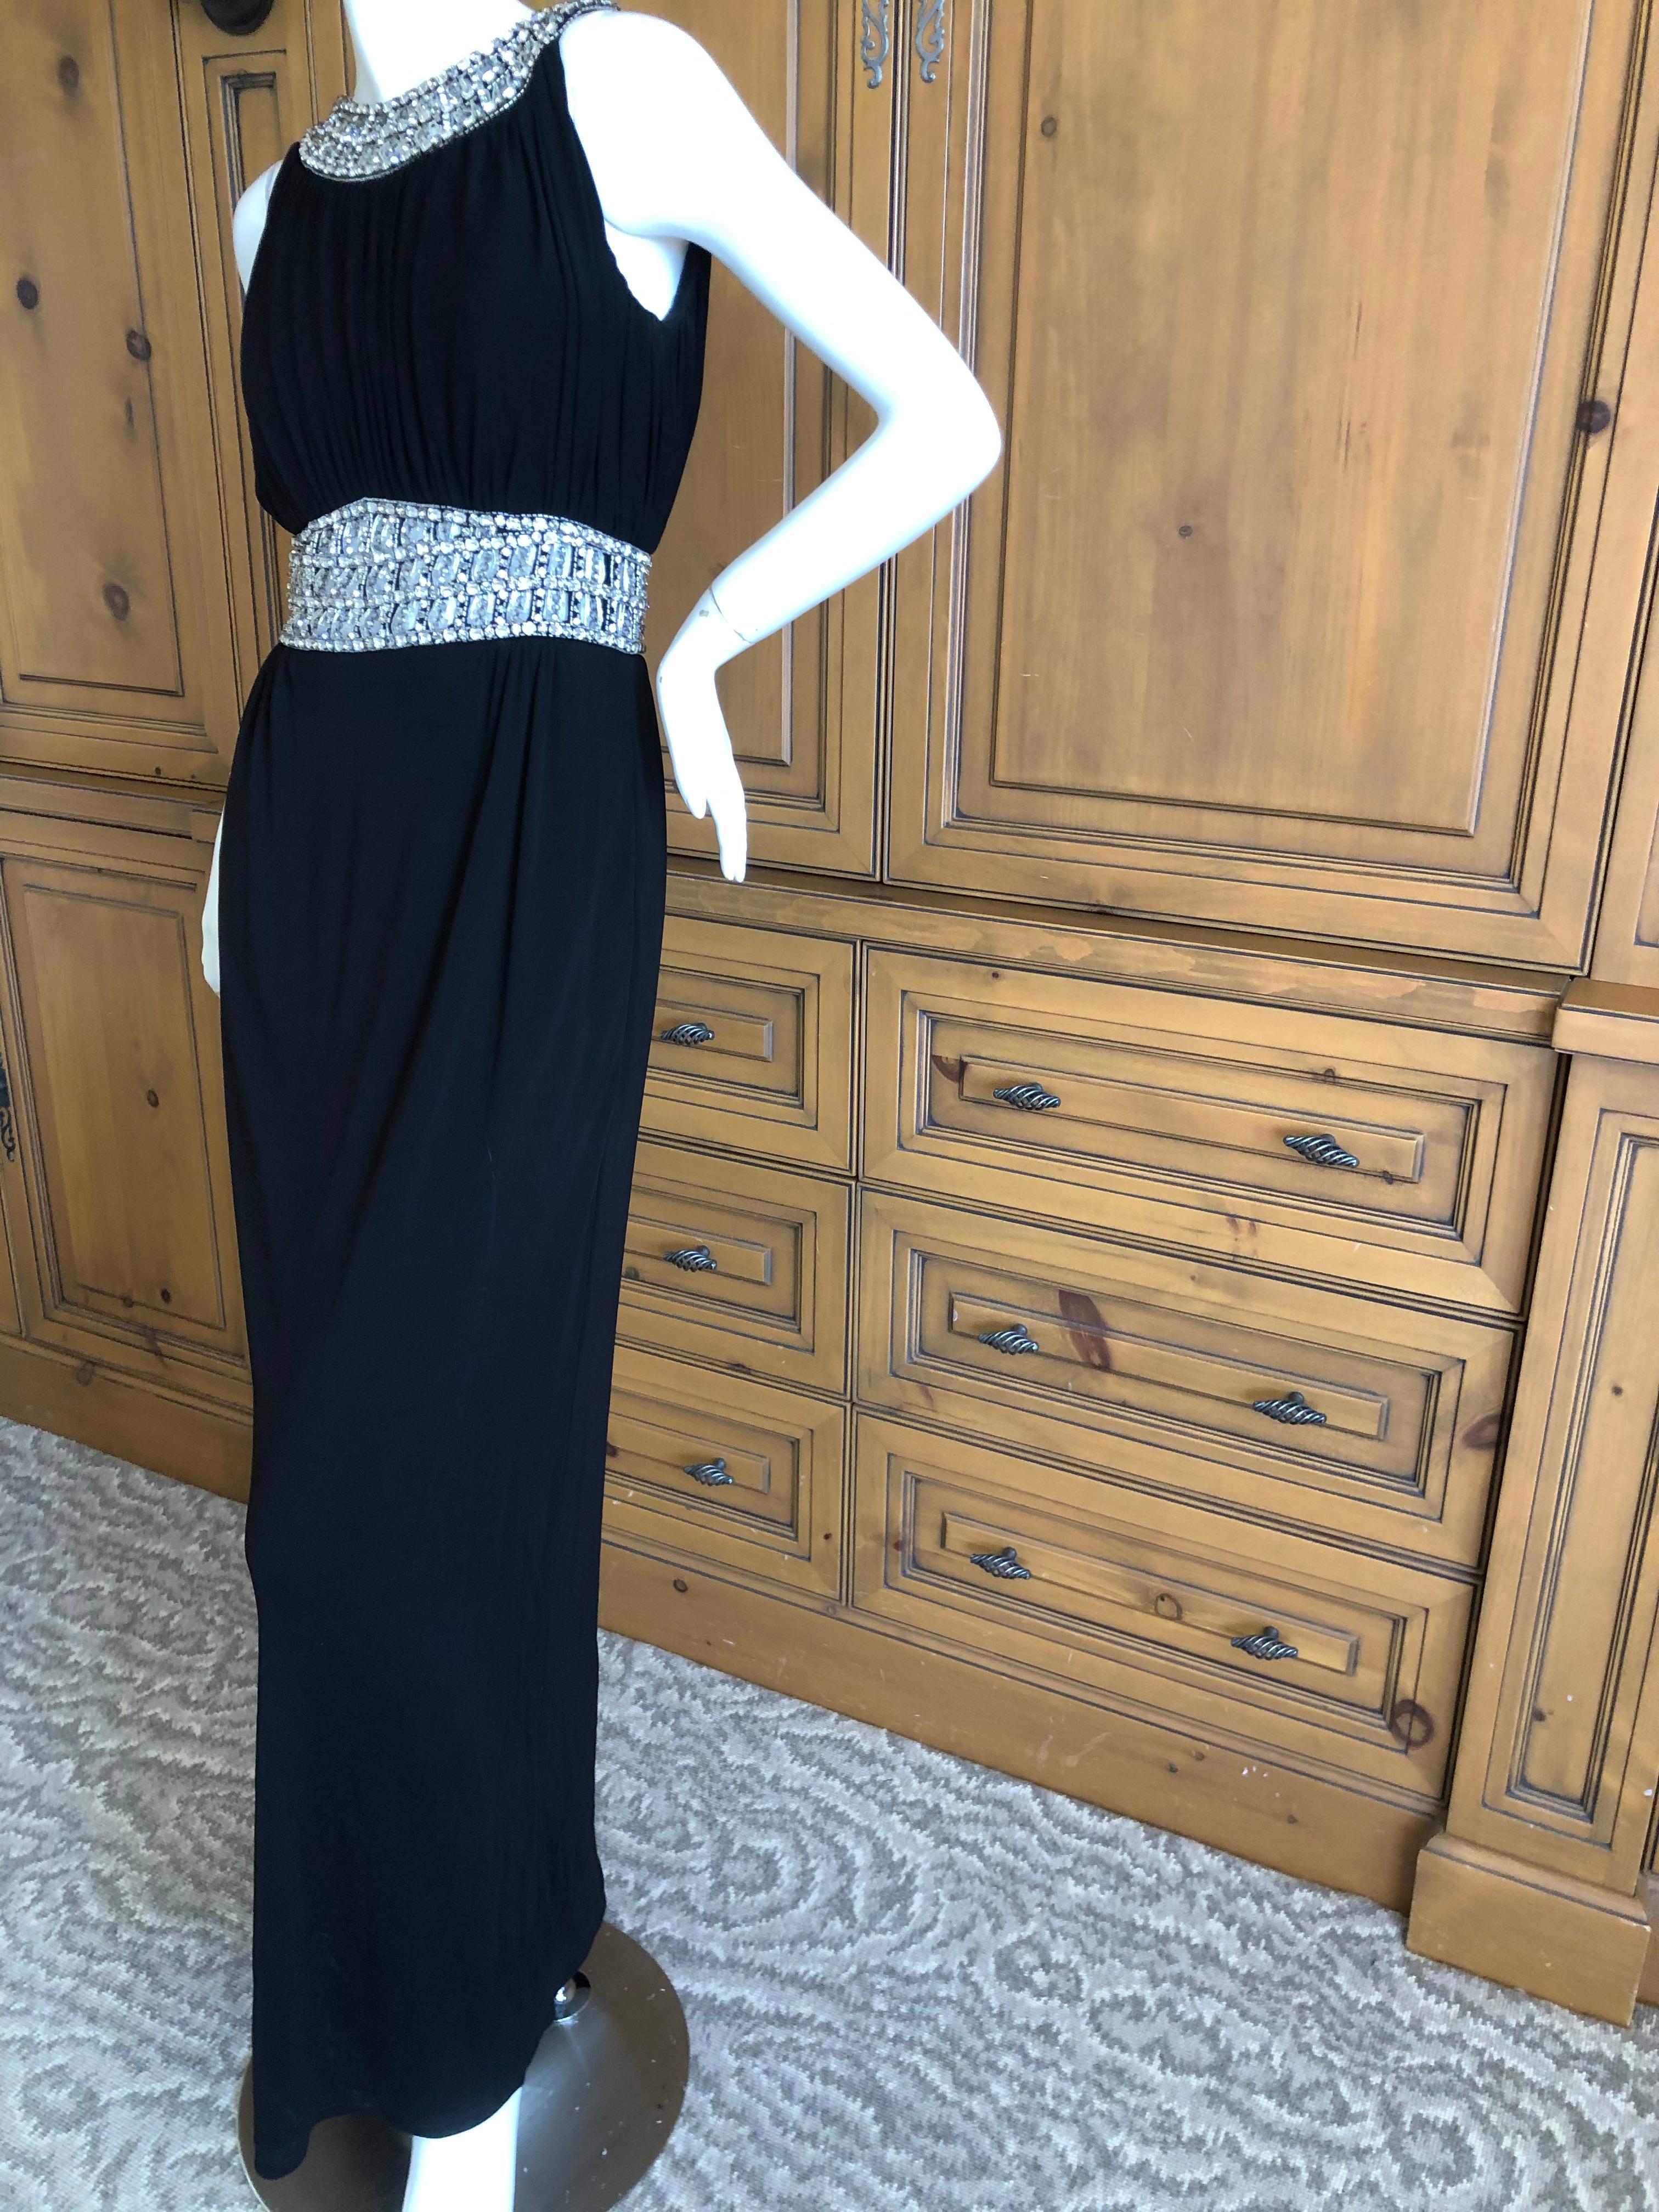 Azzaro Vintage Pleated Black Evening Dress with Gobsmacking Jewel Collar & Belt.
This is so wonderful, please use the zoom feature to see details.
 Size 40
Bust 36